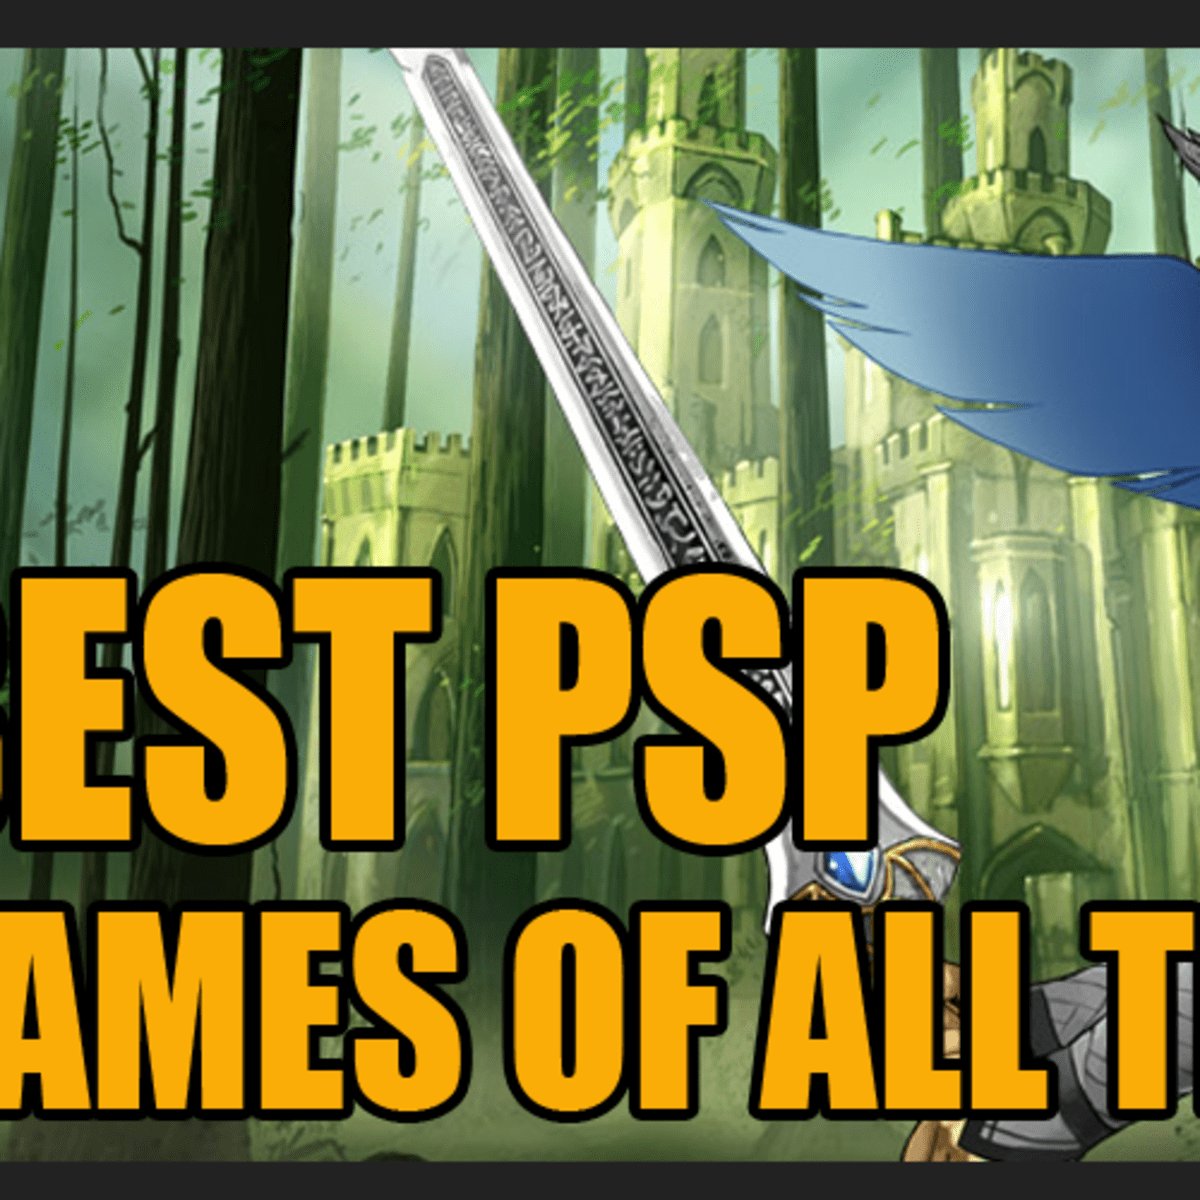 The Top PSP Games Of All Time